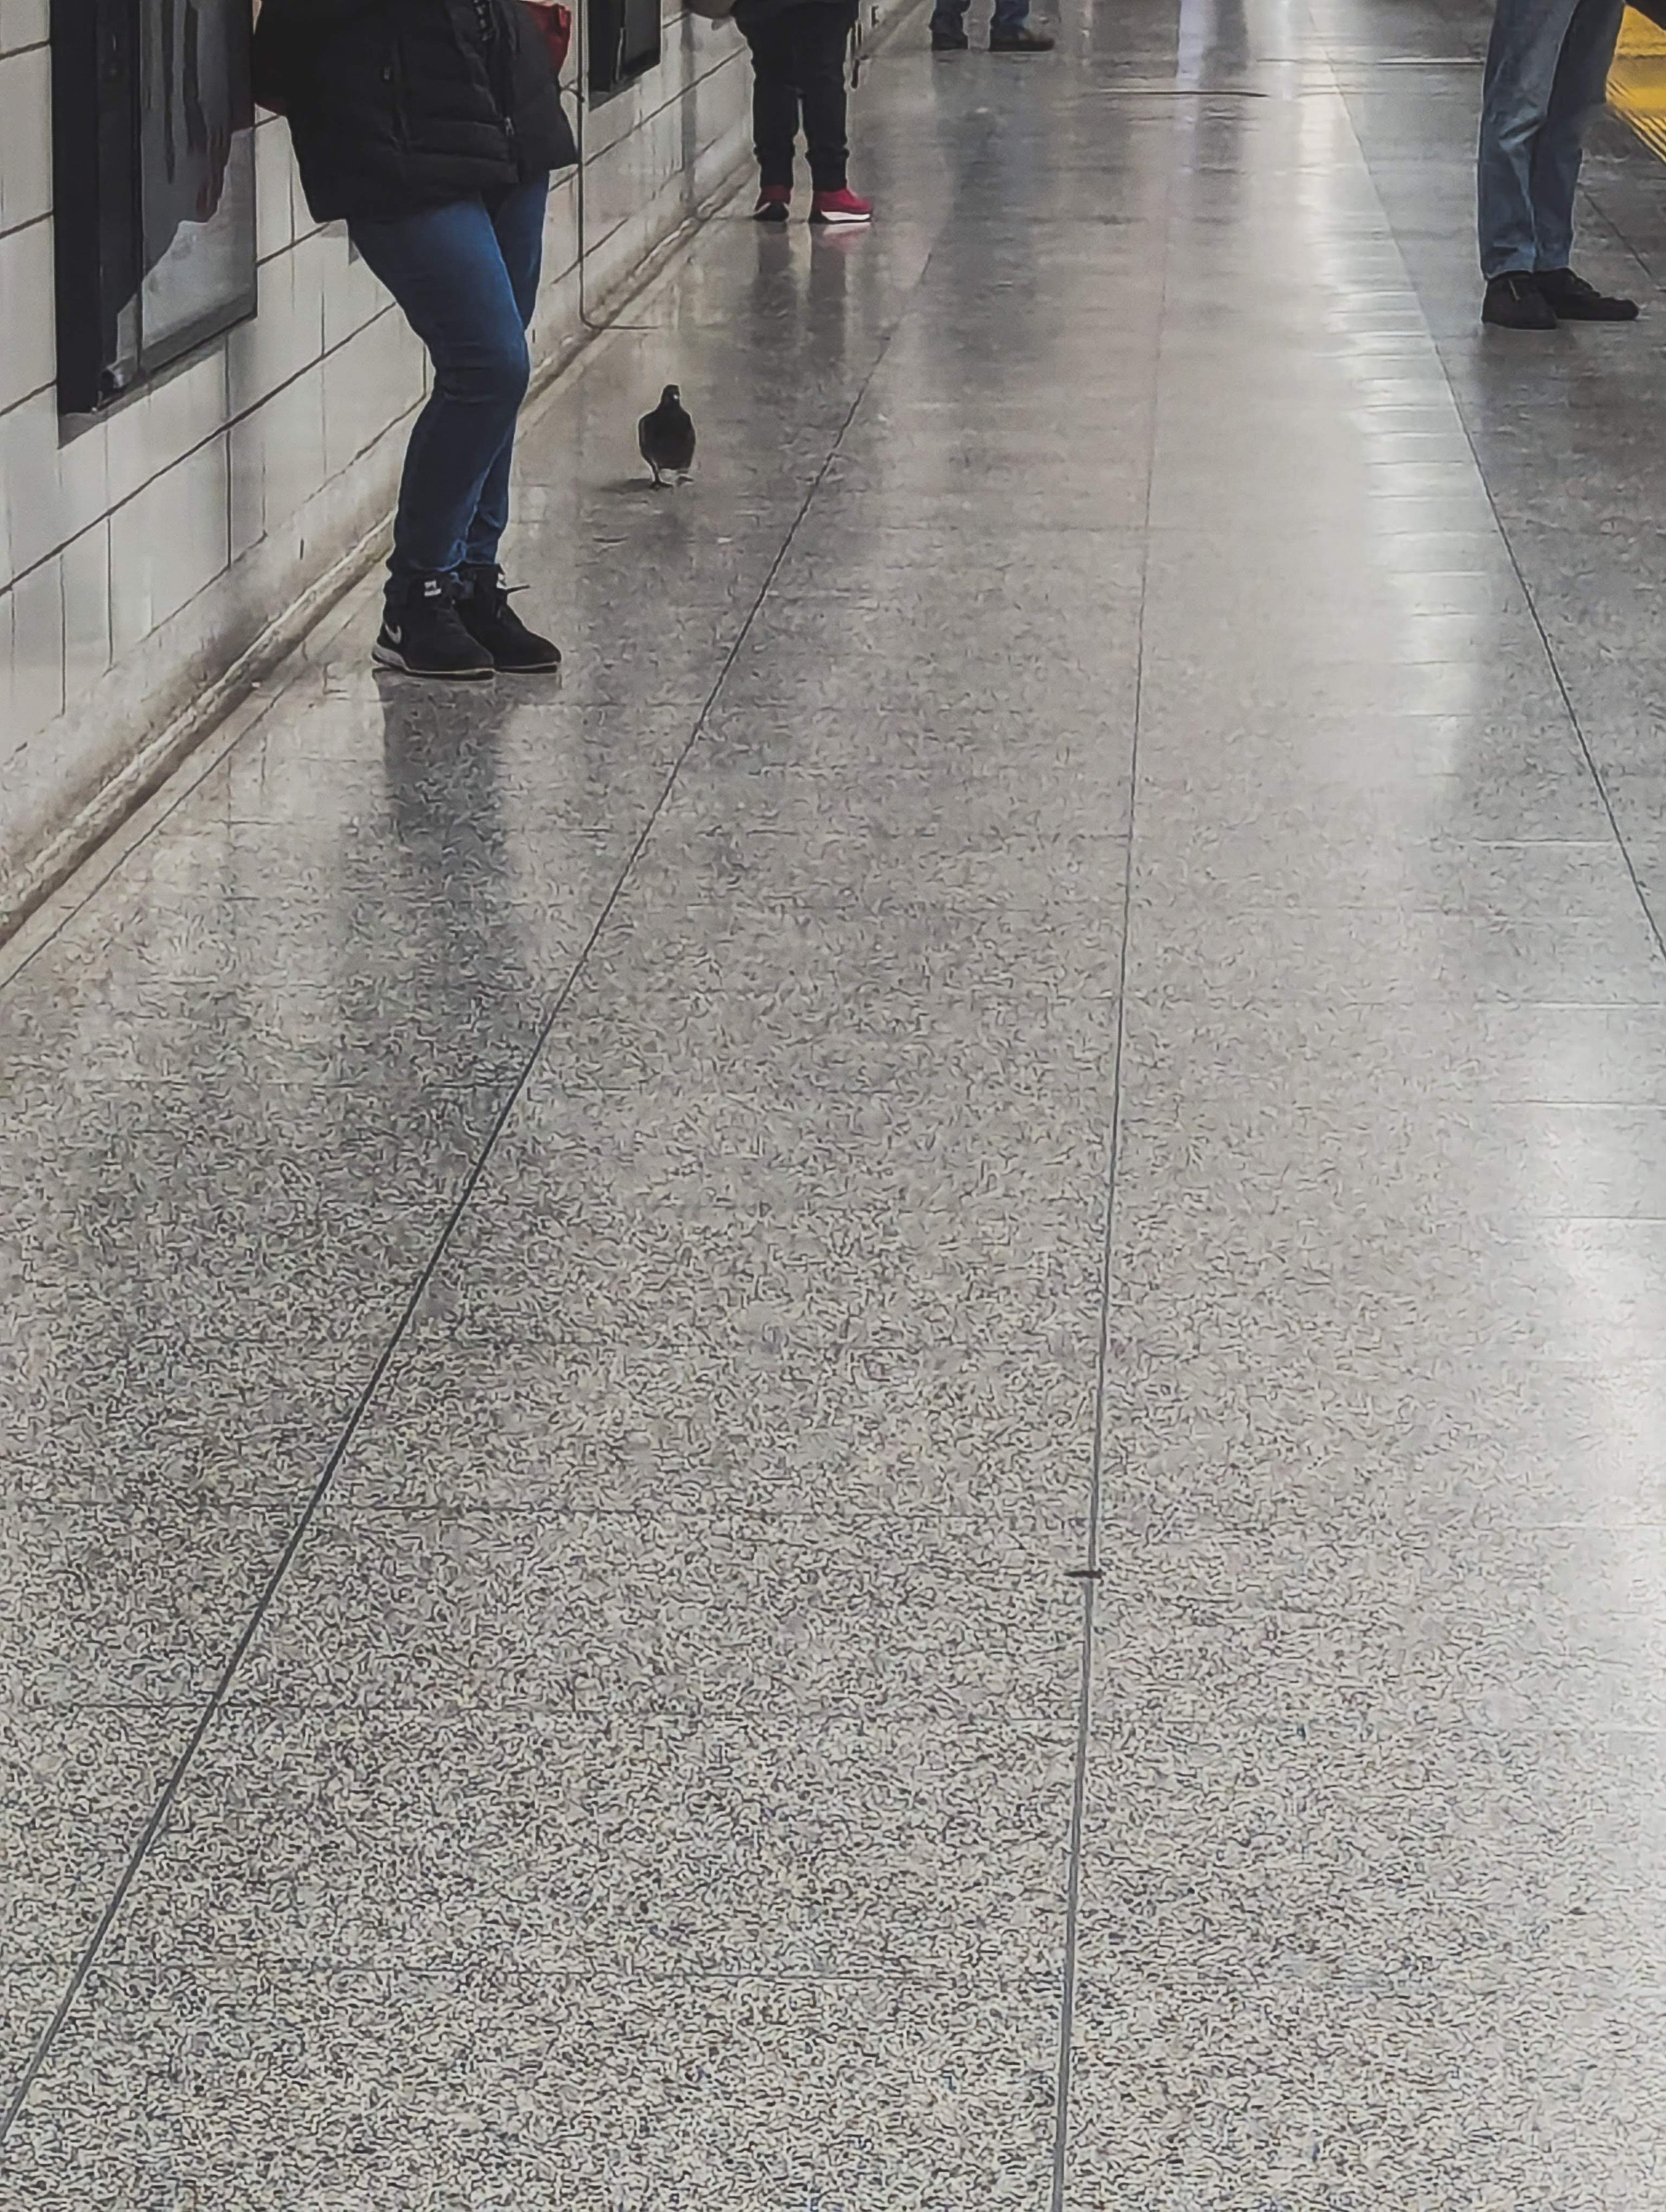  You know I’m getting a bit desperate for moments of joy when I start snapping photos of the pigeon in the subway station! This lil’ guy just made me smile - it always seems to weird to see birds indoors! 